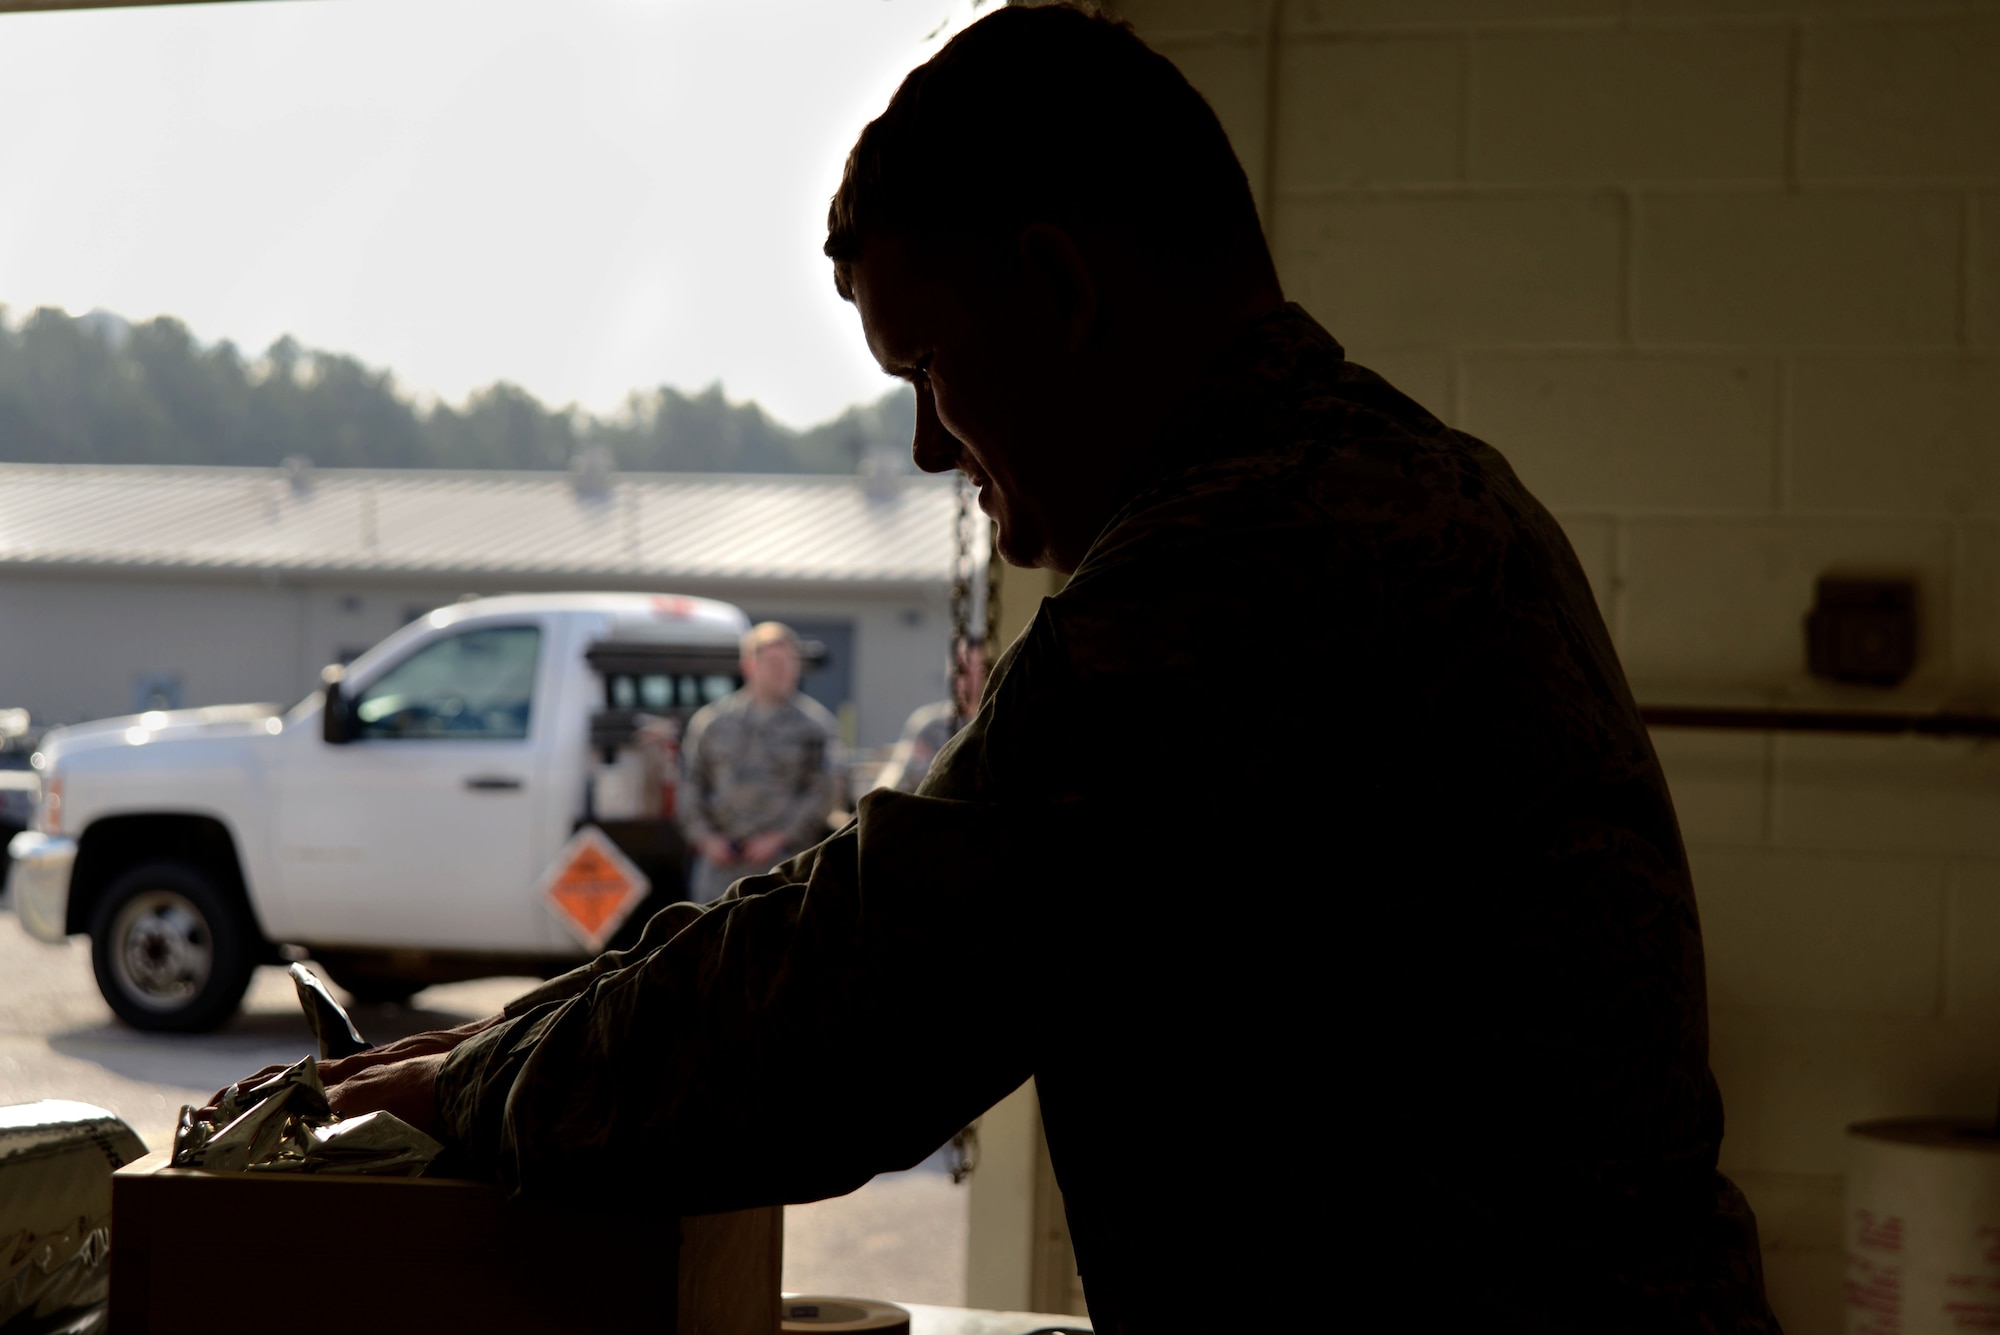 U.S. Air Force Staff Sgt. Cameron Miller, 20th Equipment Maintenance Squadron munitions inspector, packs a box of 40 mm grenades into a crate at Shaw Air Force Base, S.C., Feb. 6, 2017. The crate protects the box of munitions during storage and transportation. (U.S. Air Force photo by Airman 1st Class Kathryn R.C. Reaves)